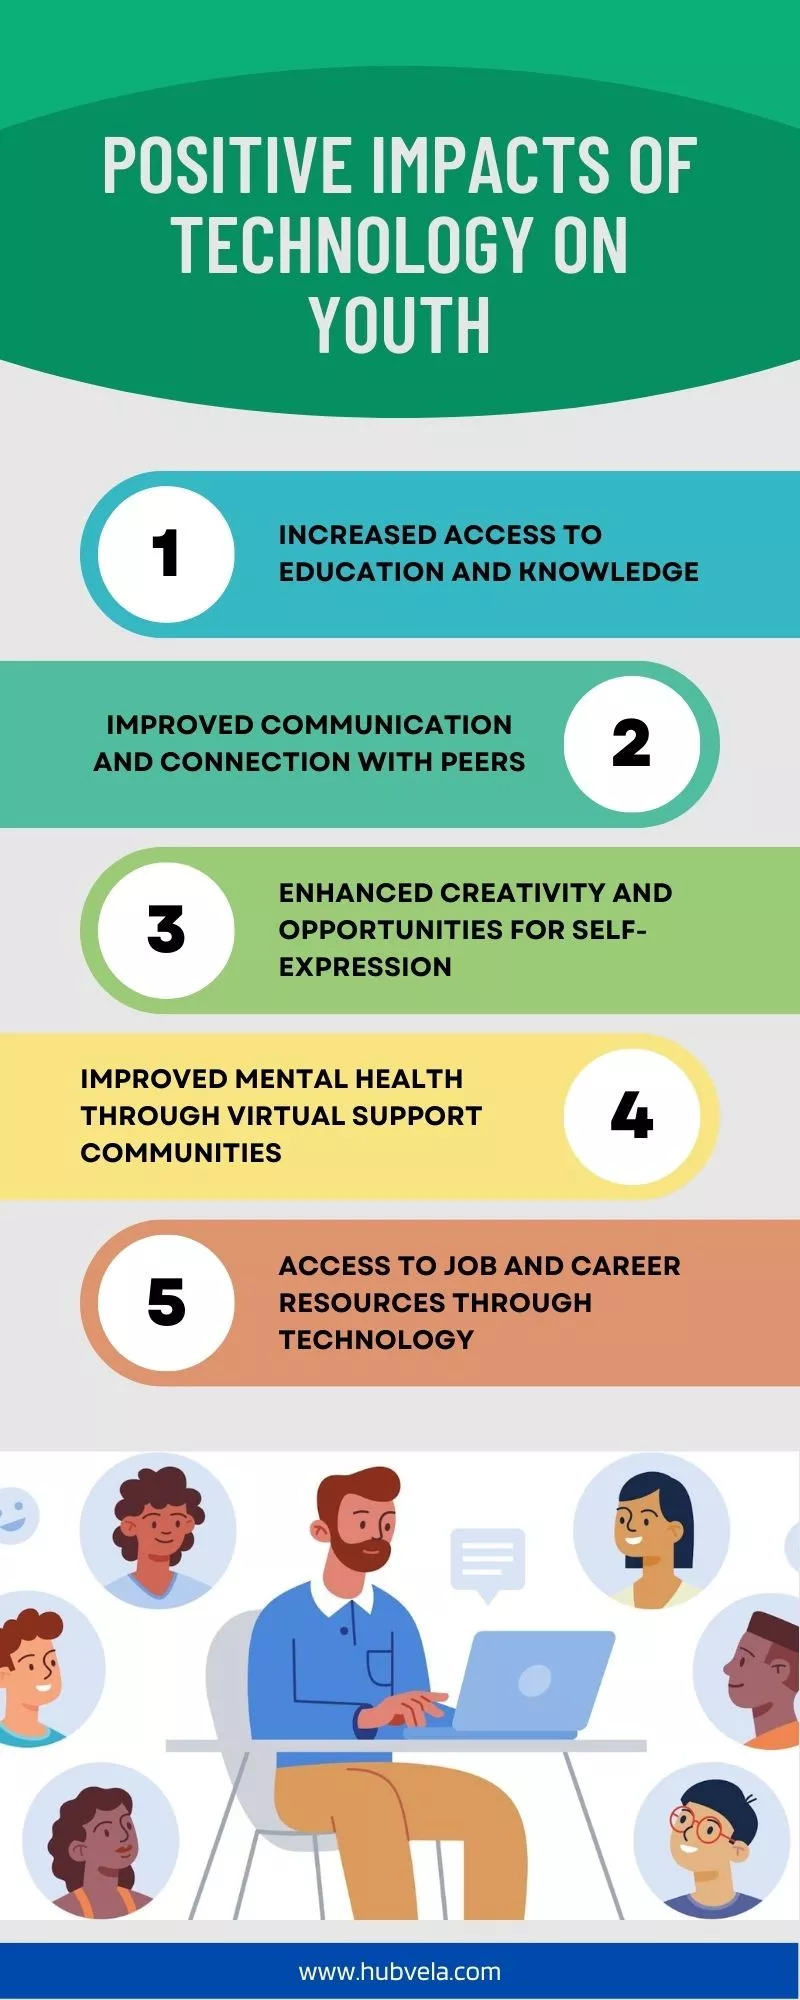 Positive Impacts of Technology on Youth infographic